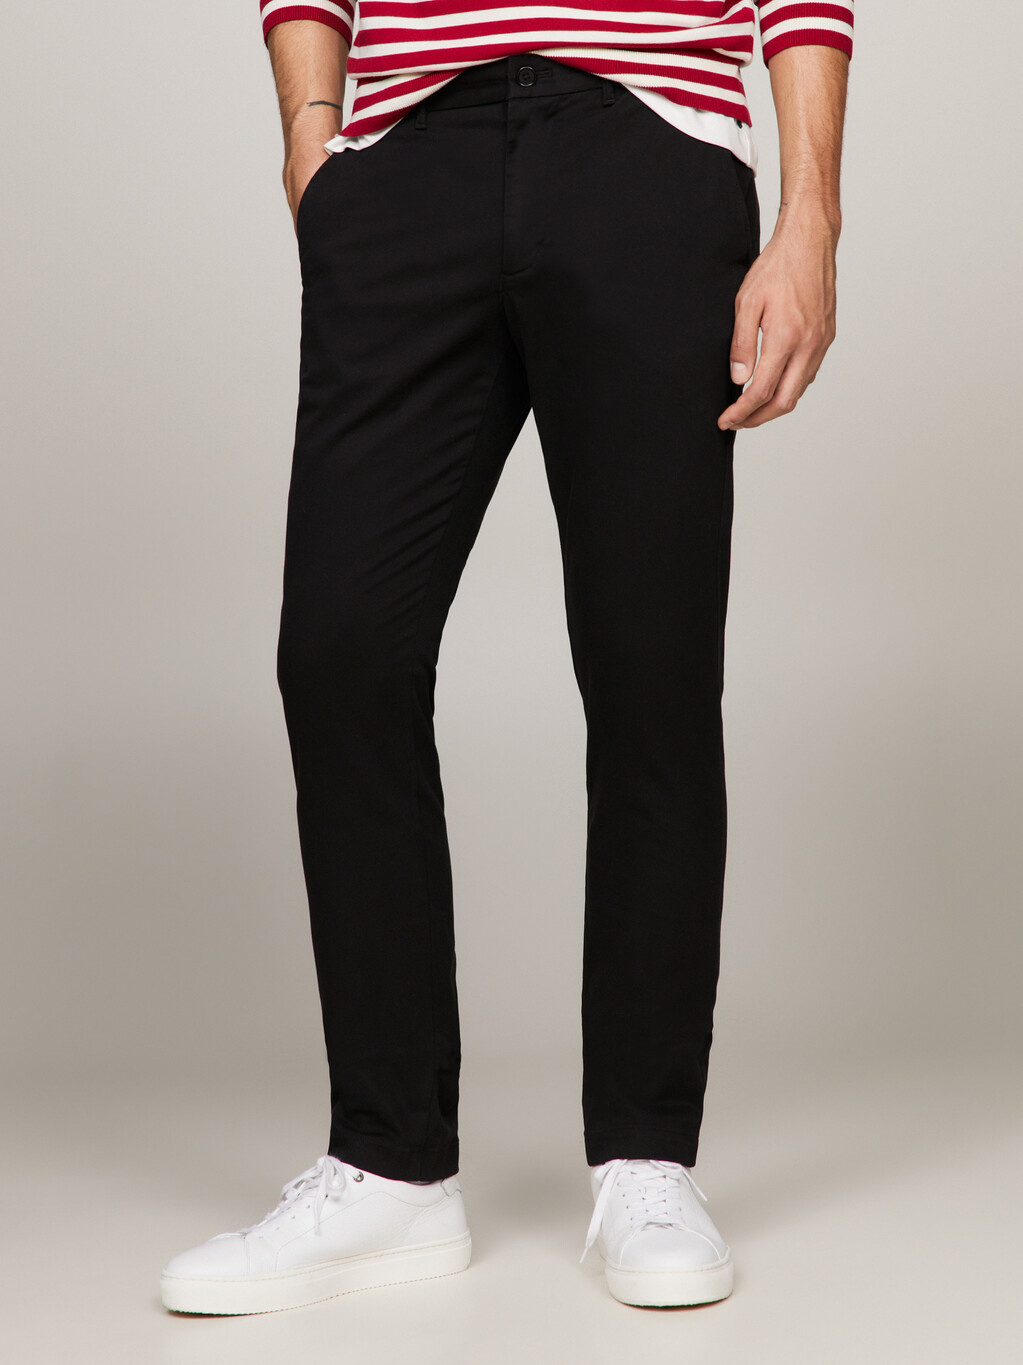 1985 Collection Bleecker Slim Fit Chinos, Black, hi-res